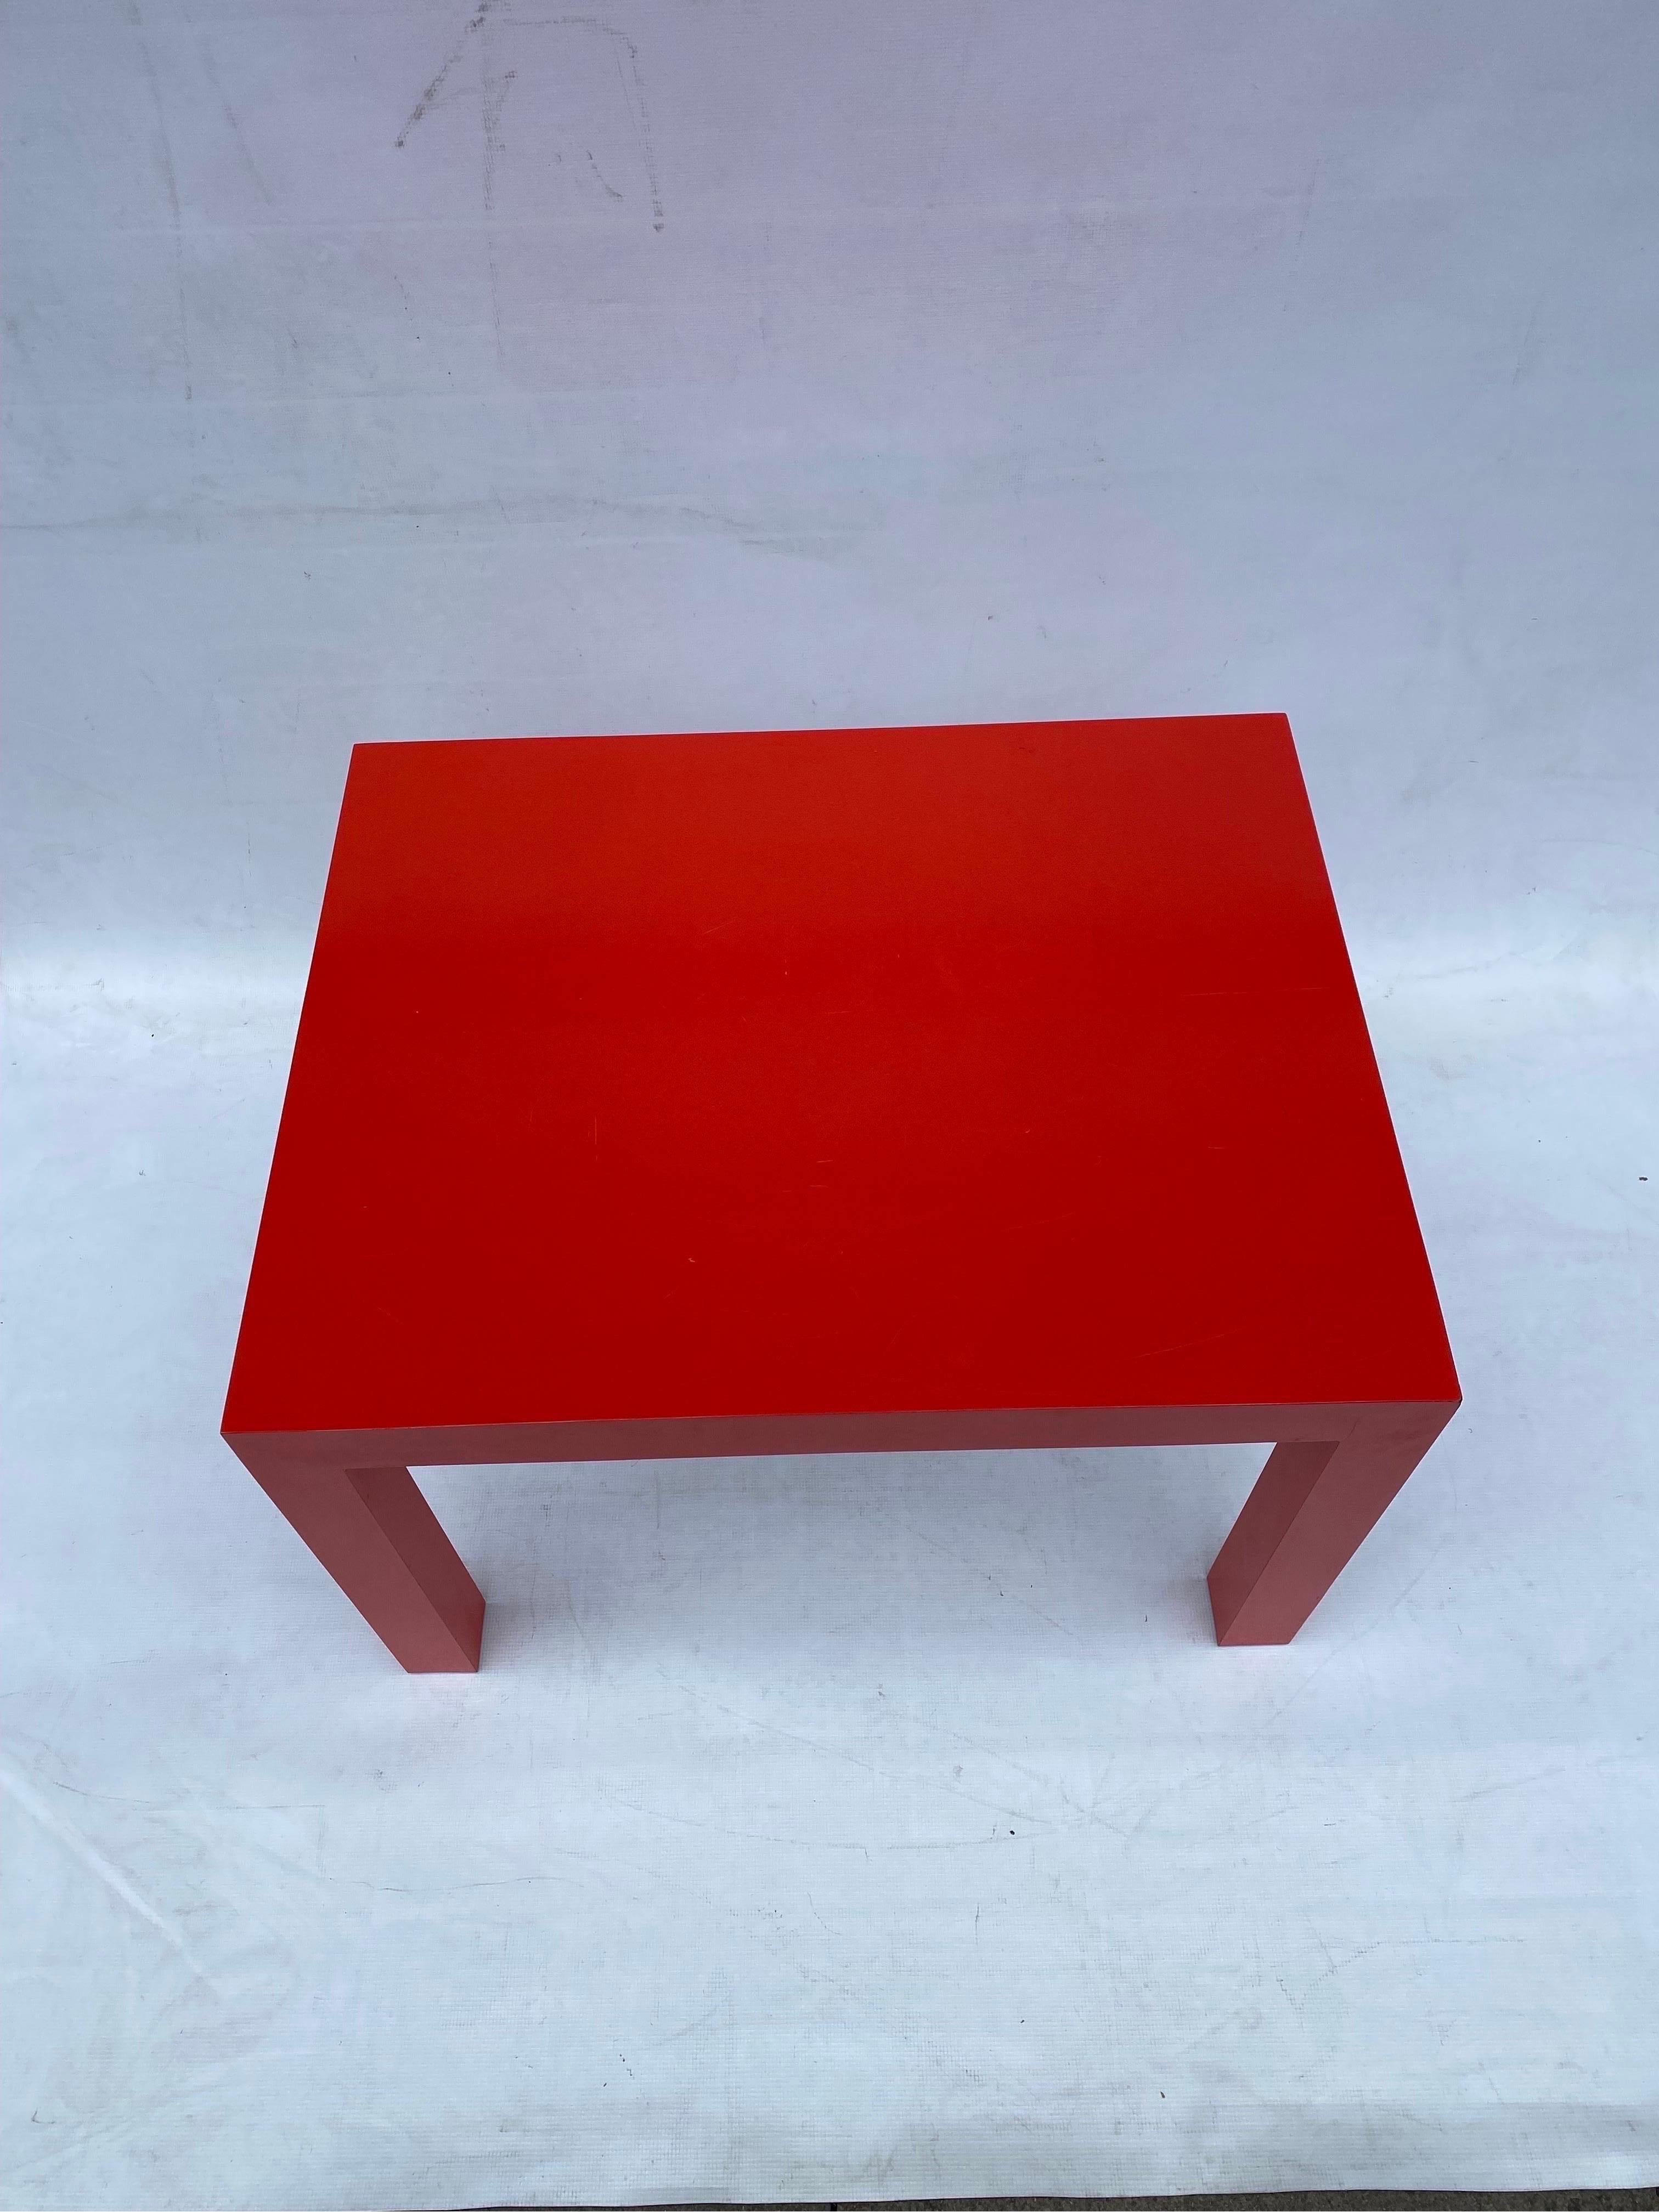 Mid-Century Modern Milo Baughman for Thayer Coggin Formica Red Side Coffee Table 1960s Mid Century  For Sale